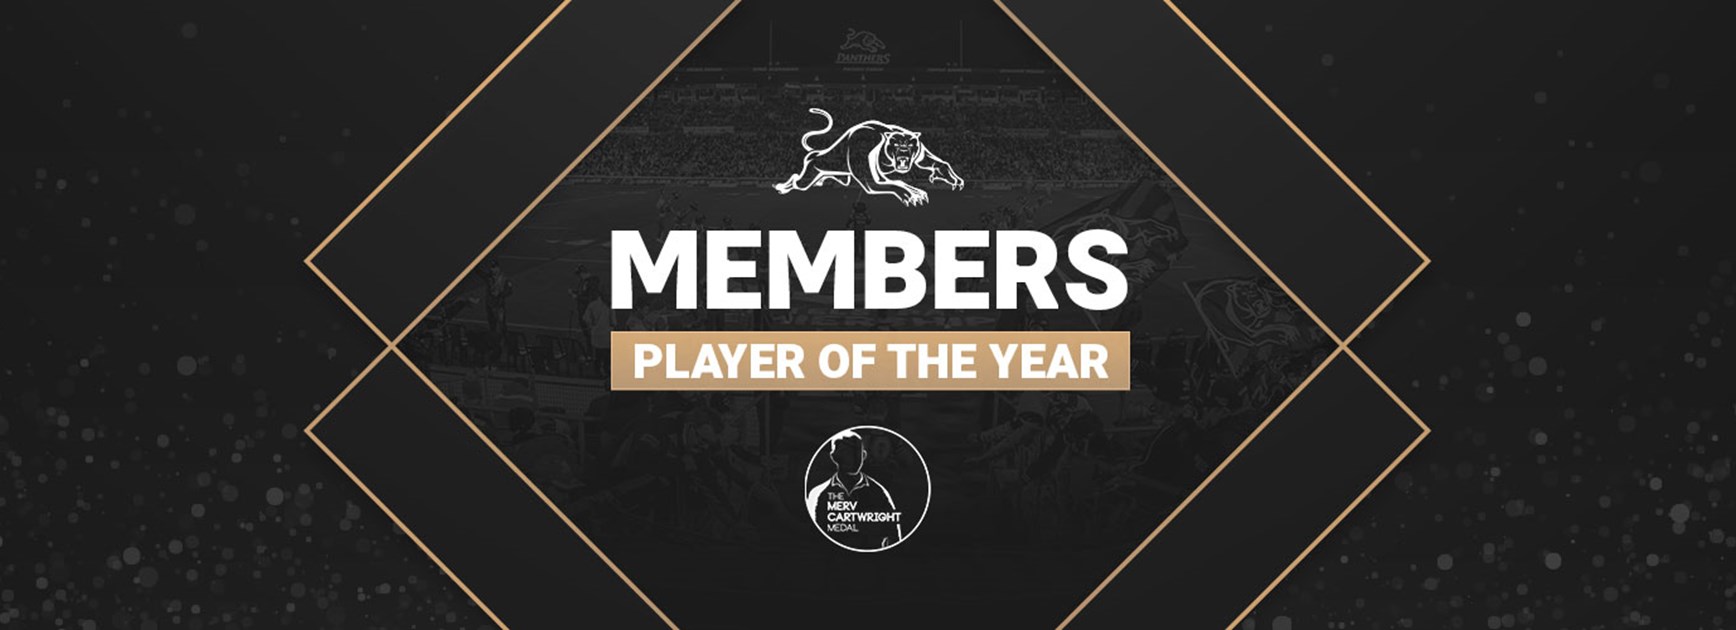 Voting open for Members Player of the Year